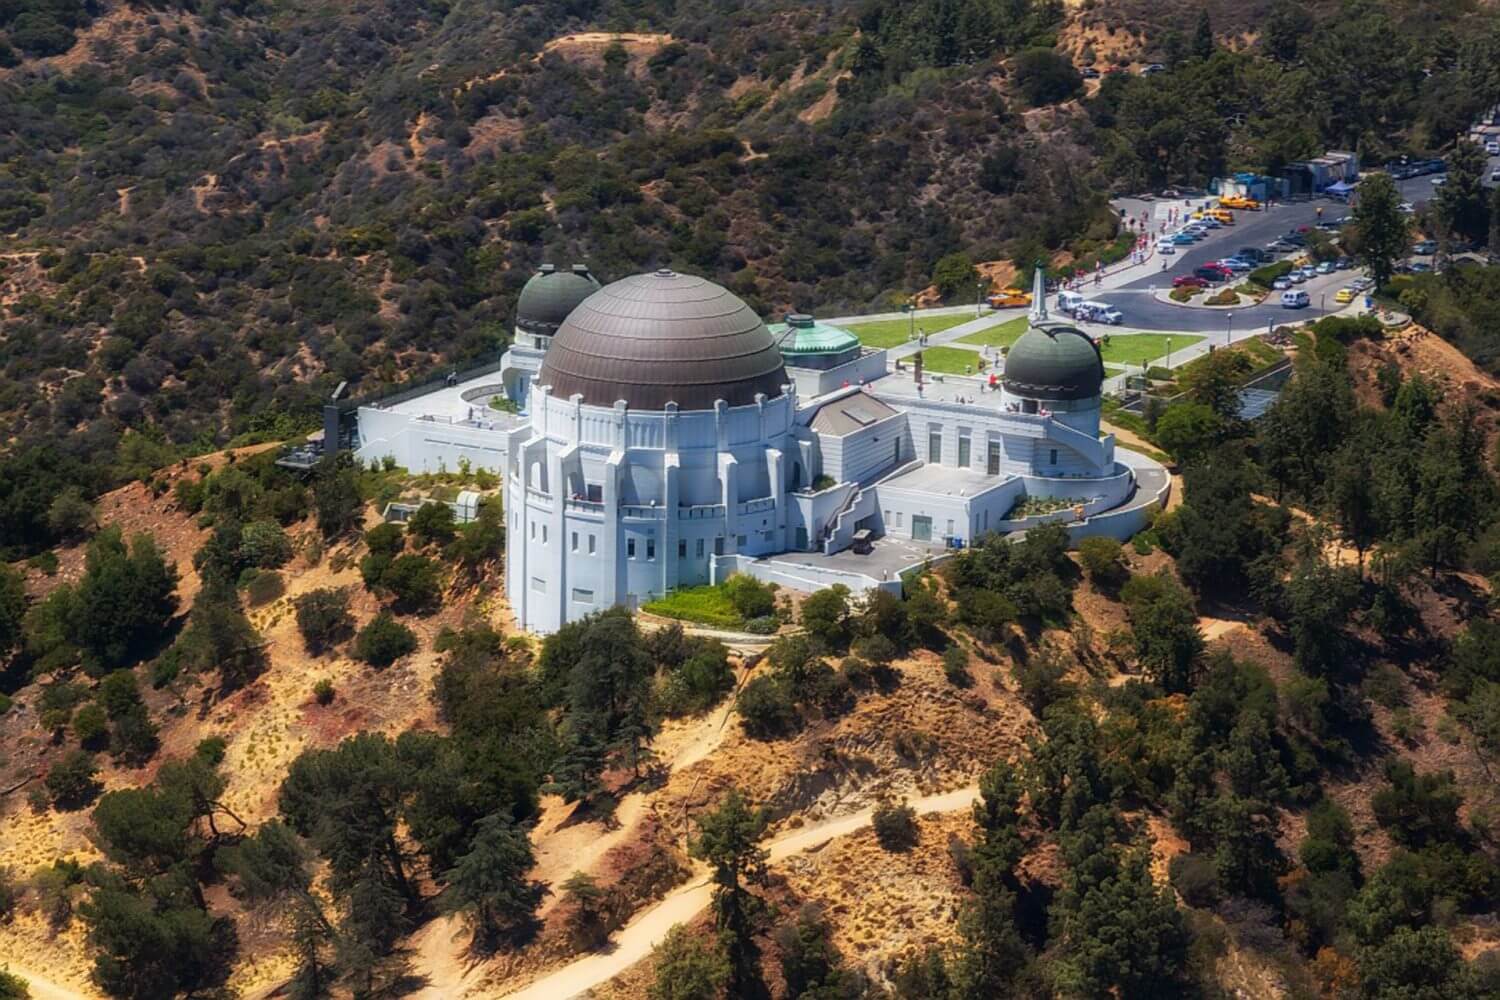 Griffith Observatory - Image by David Mark from Pixabay